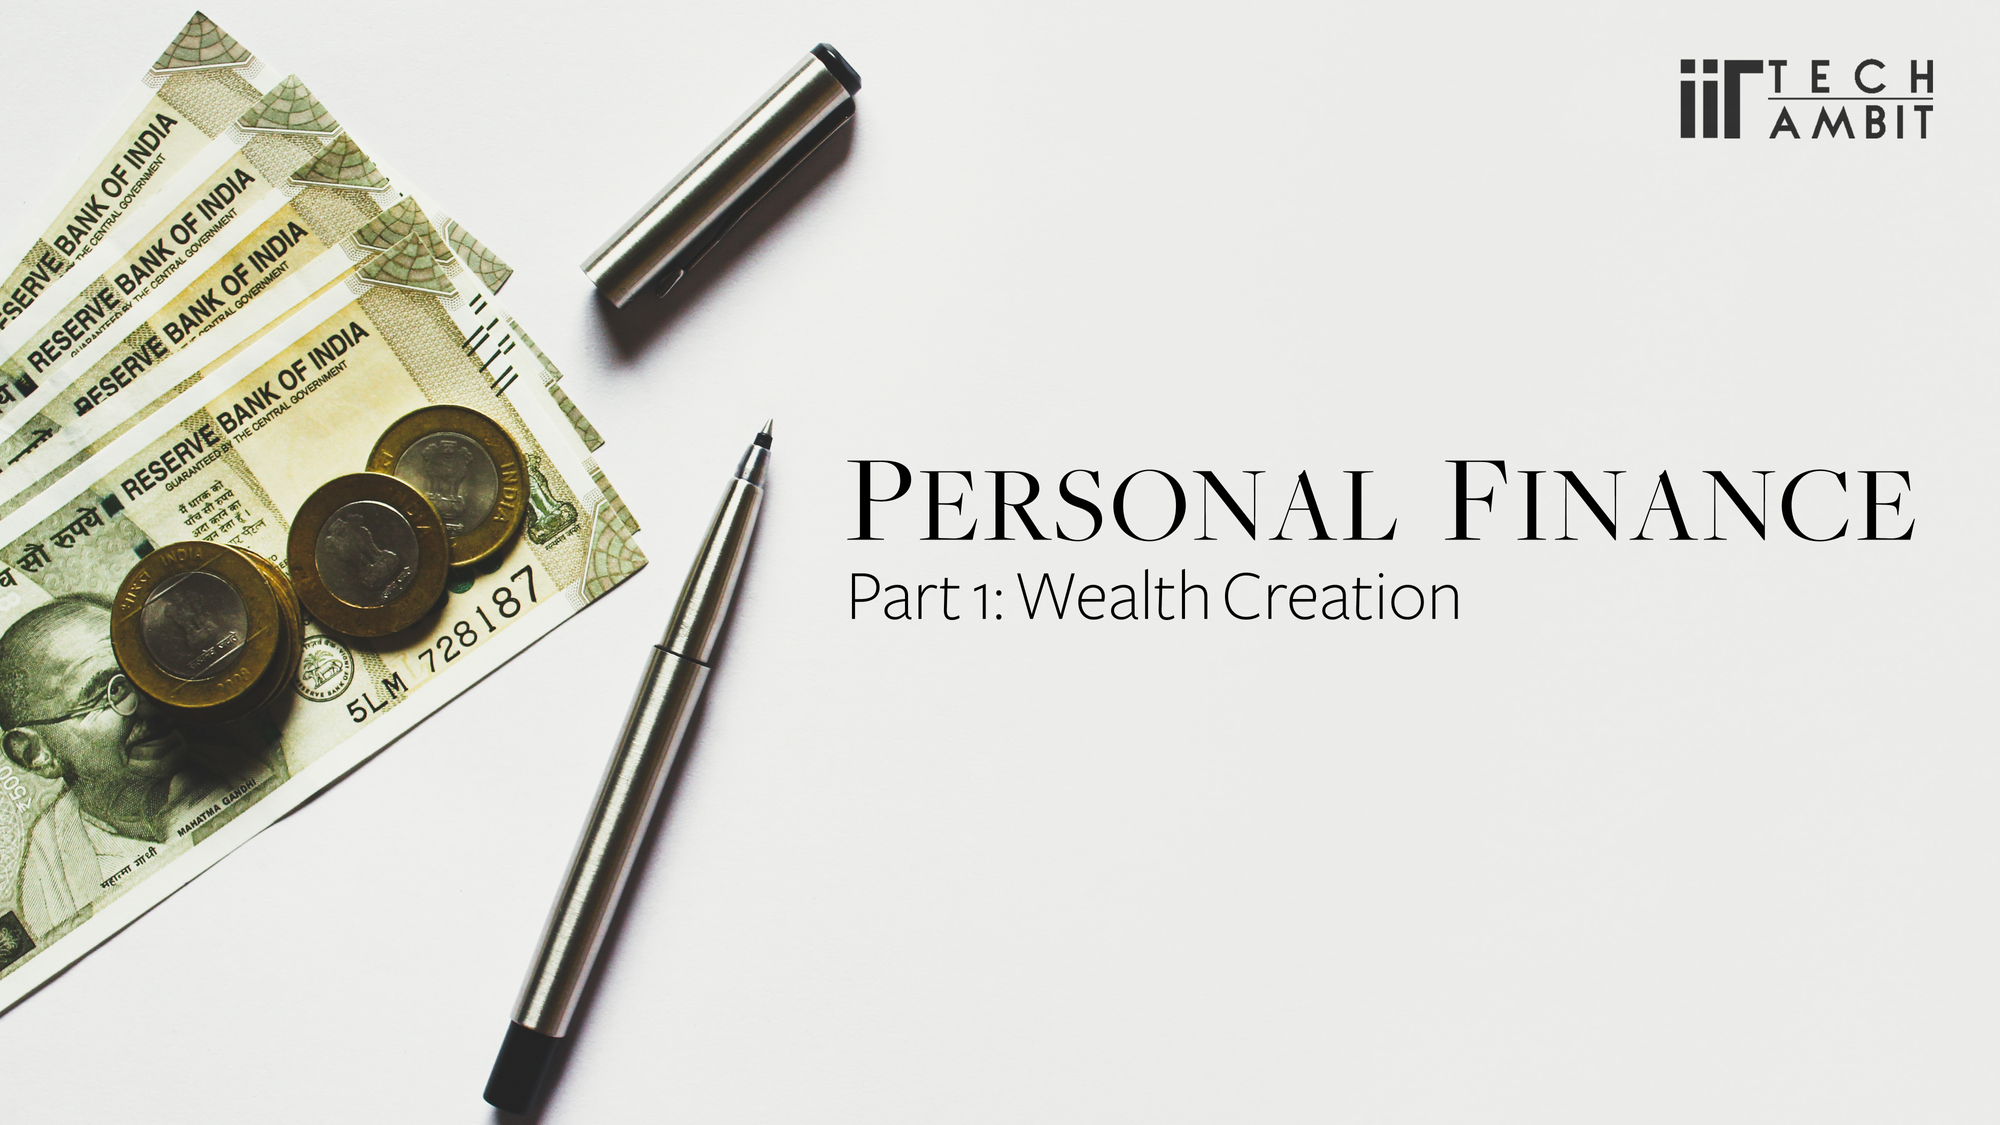 Personal finance- Part 1 Wealth Creation